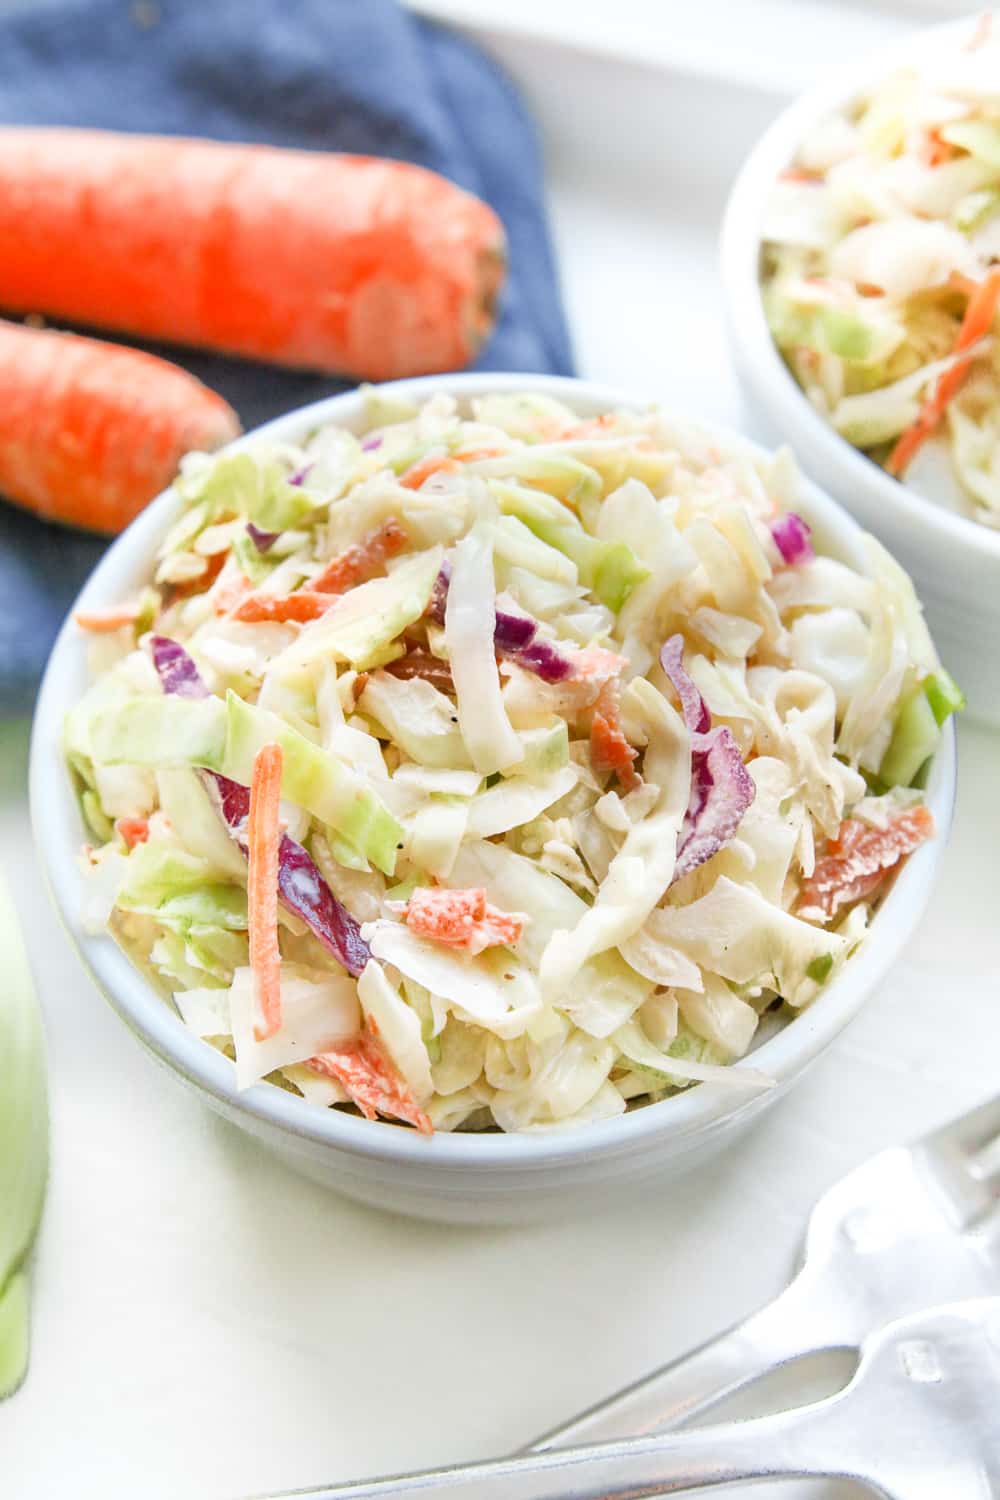 A bowl of coleslaw for the keto diet, with another bowl positioned behind it.